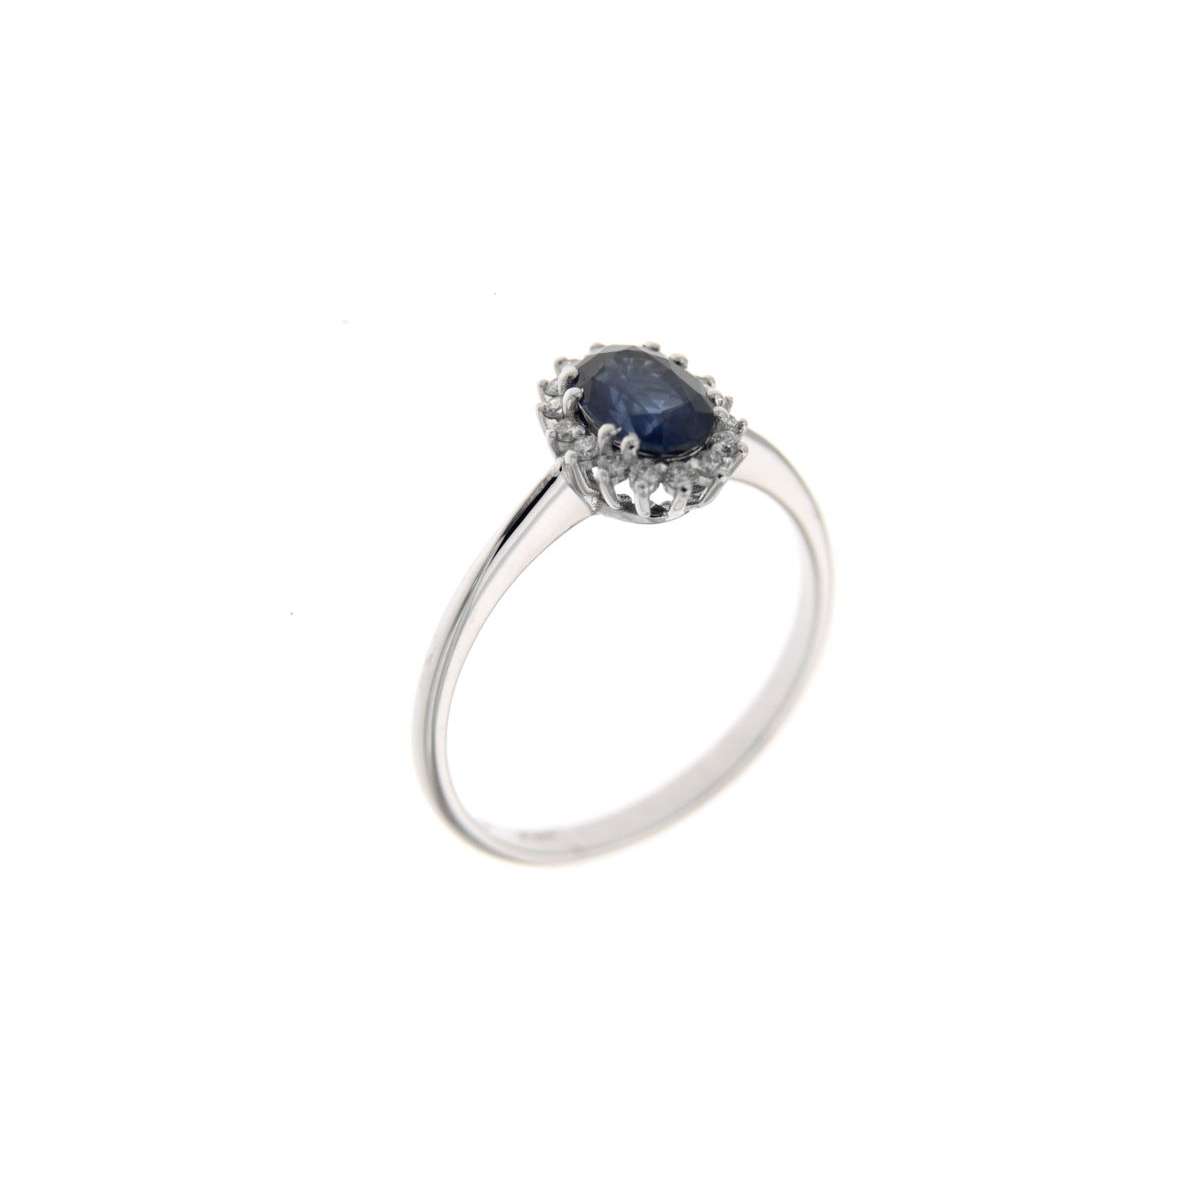 Ring with blue sapphire ct 1.04 and diamonds ct 0.15 g-vs1